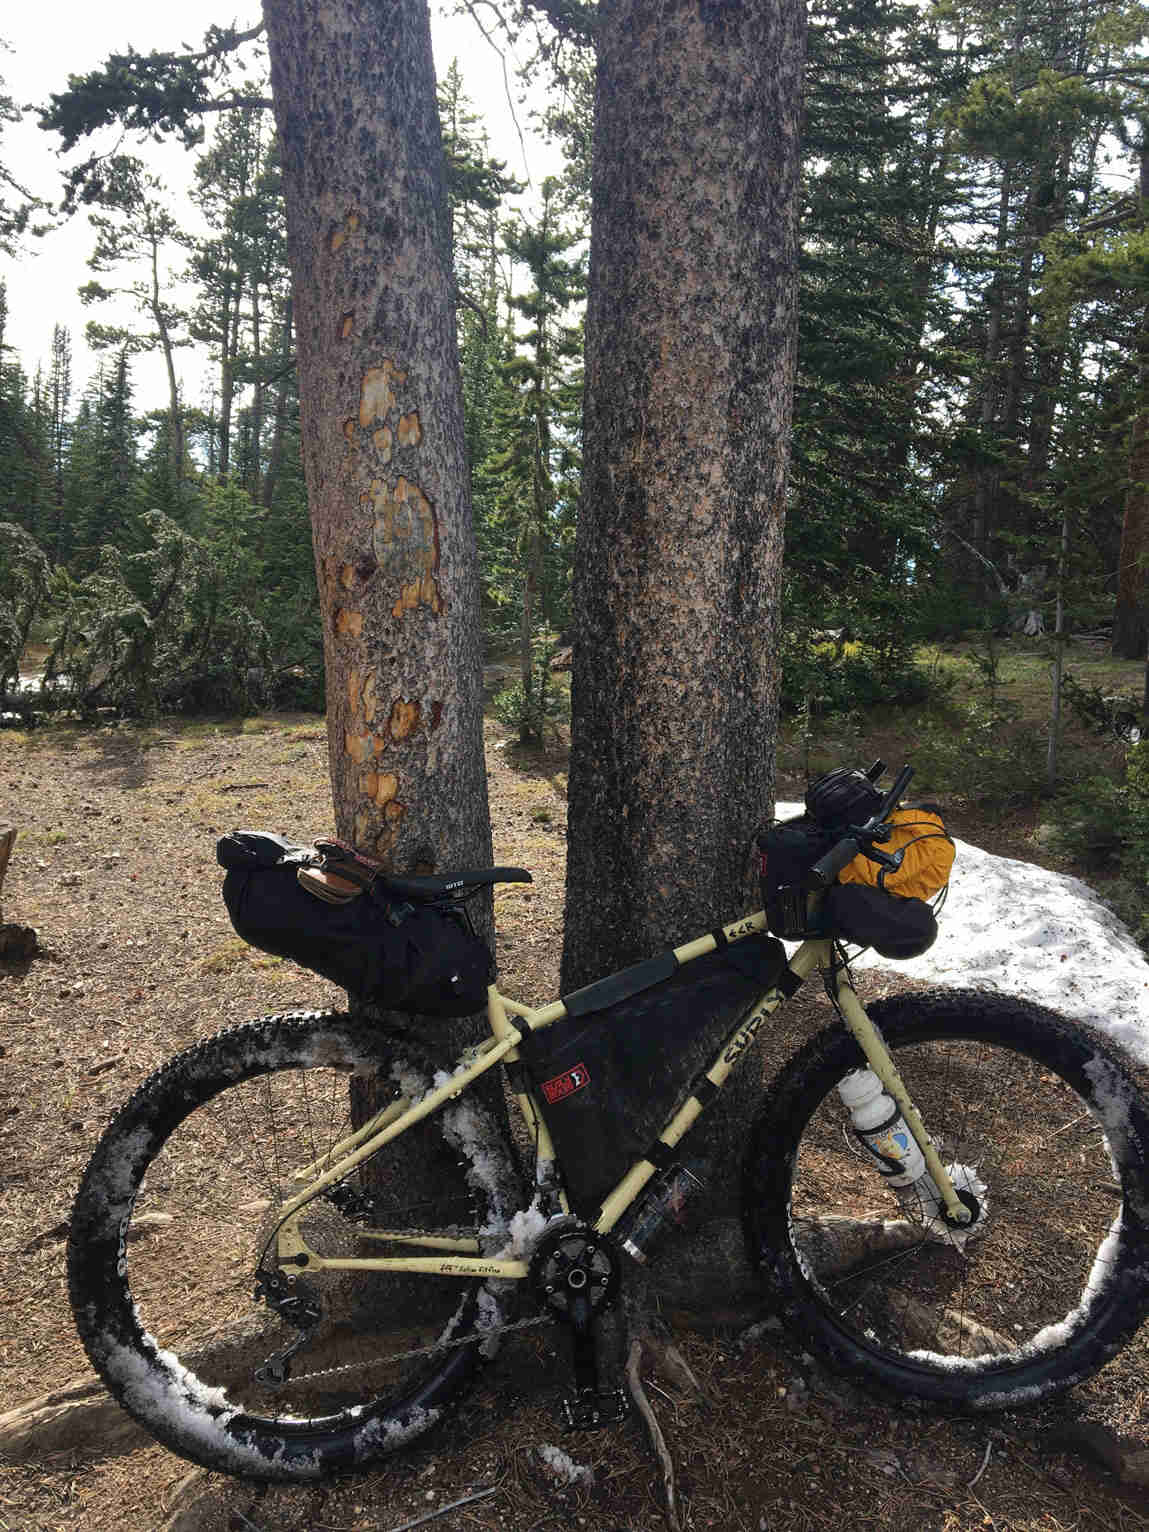 Right view of a Surly ECR bike, full of gear, leaning on 2 trees, with the forest in the background